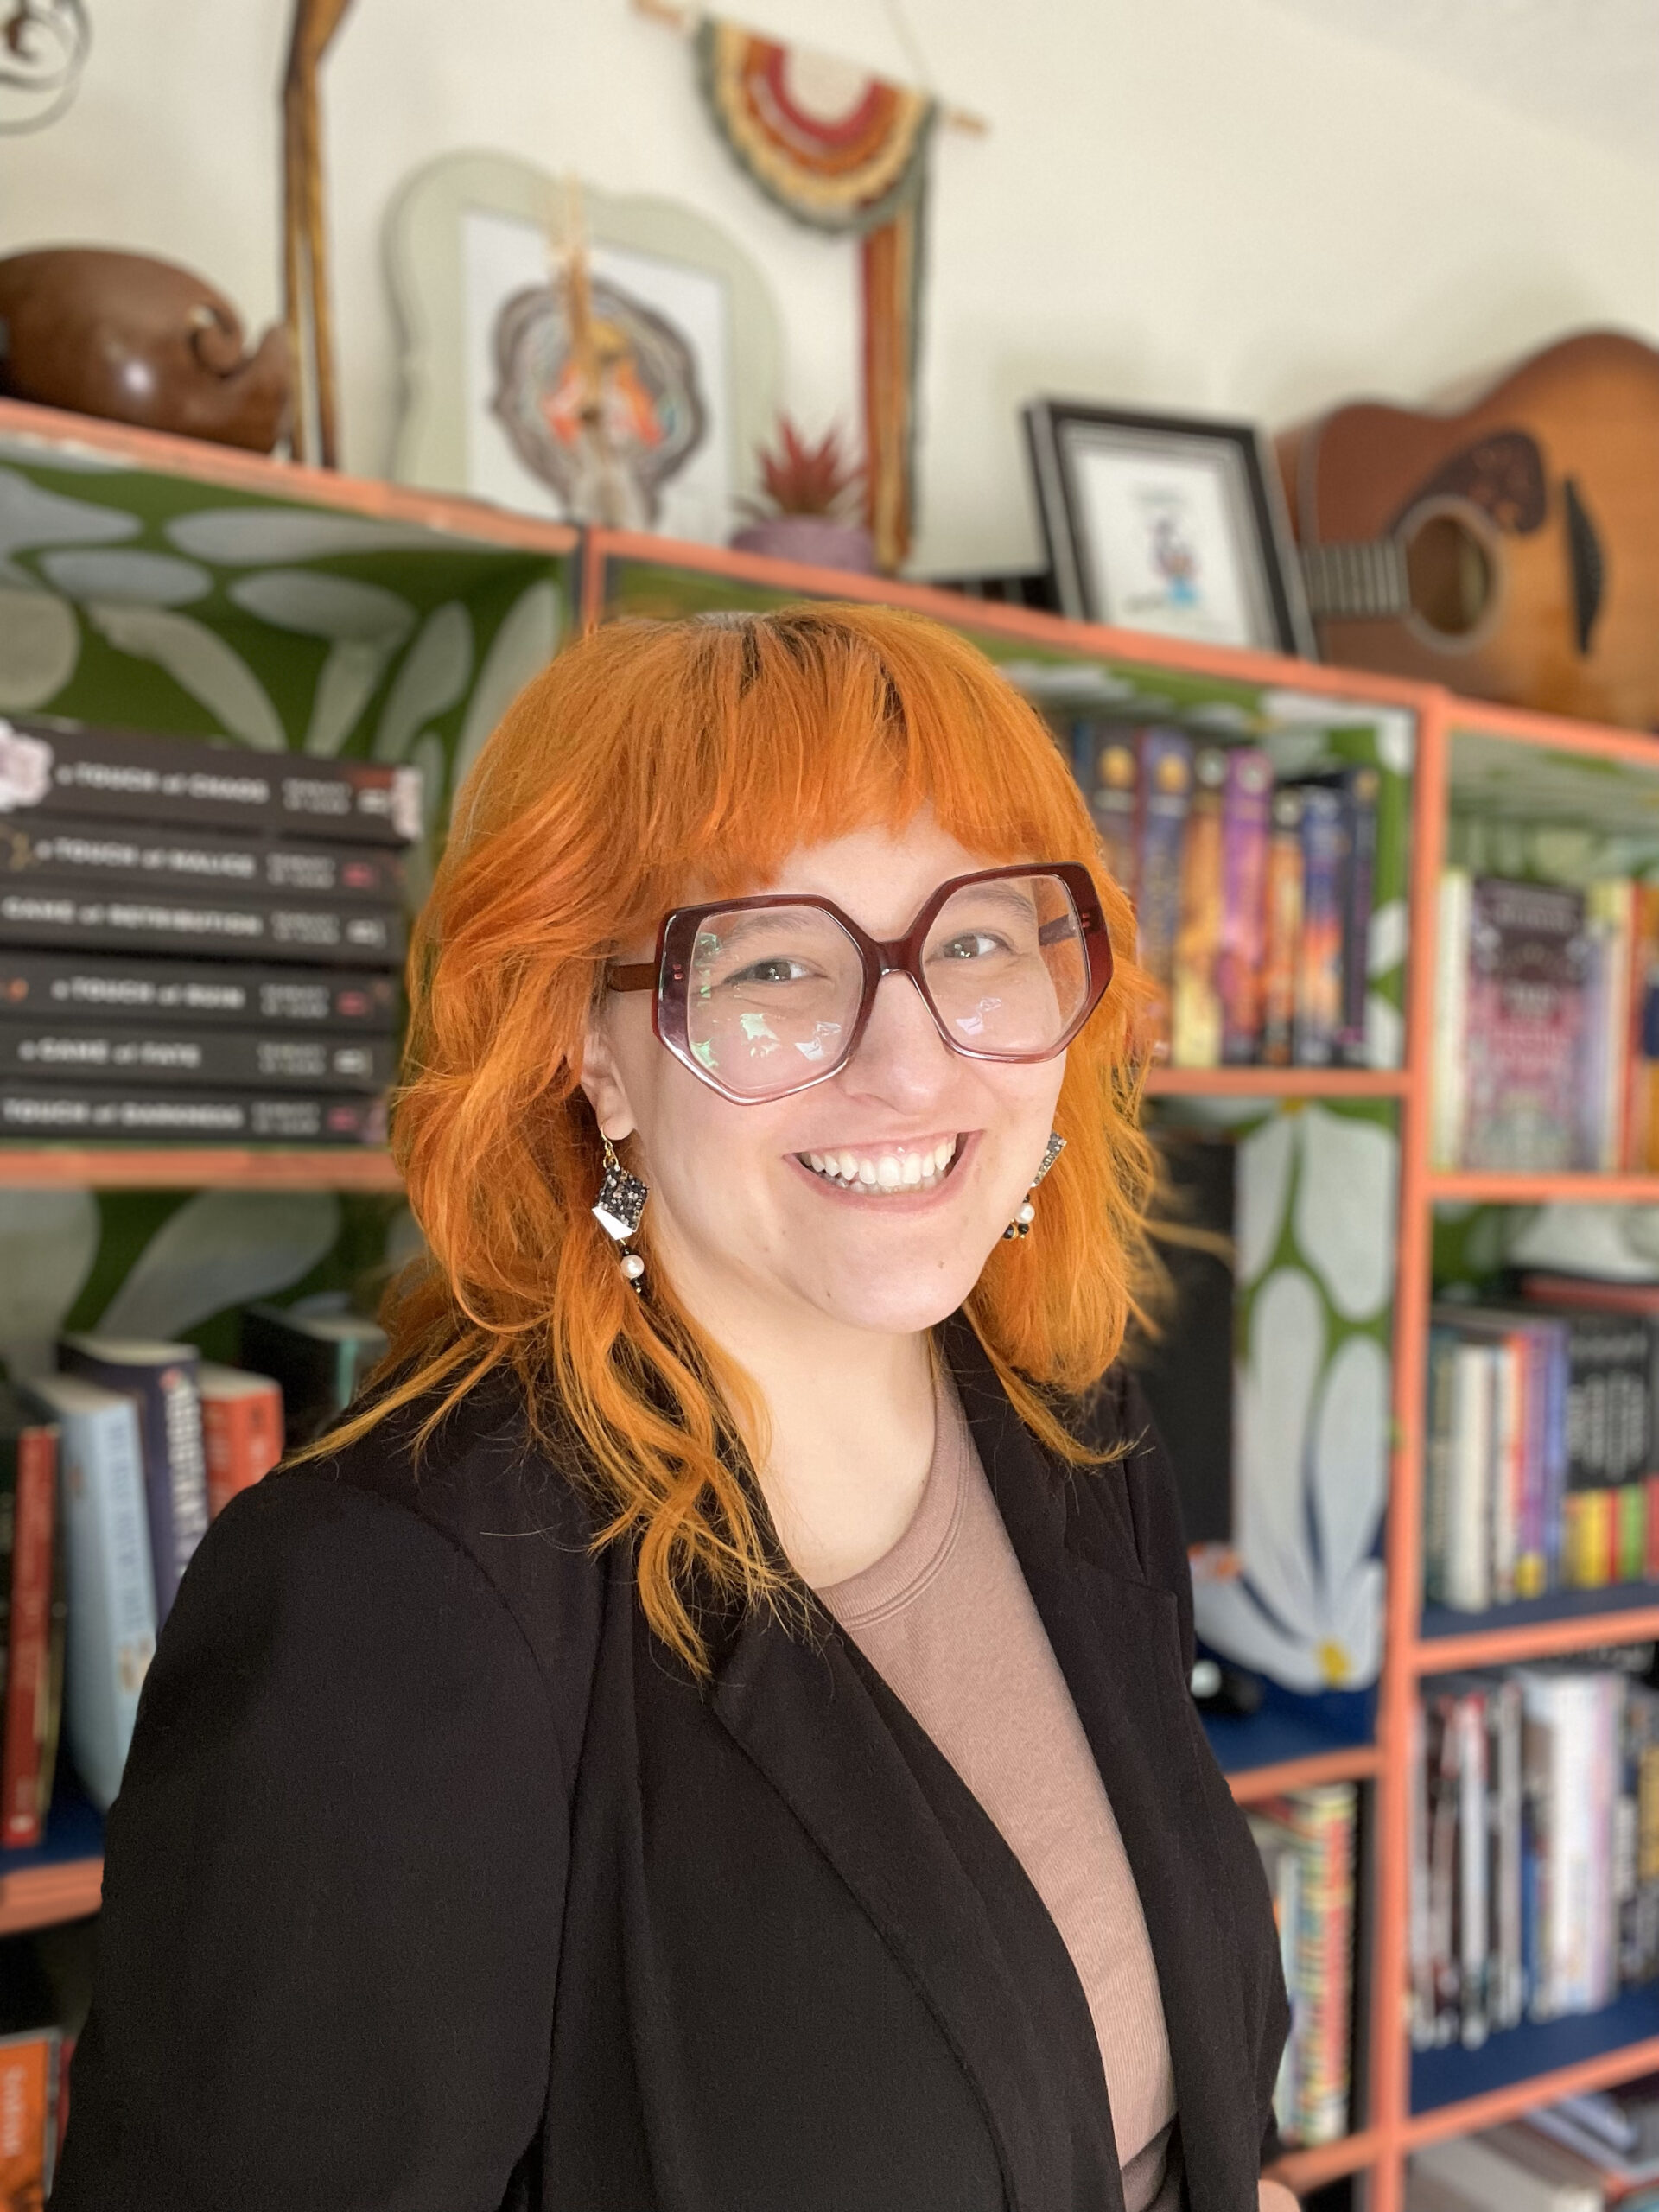 light skinned young woman stands with a wide smile and raised eyebrows in front of colorful daisy patterned bookshelves. photos, plants, crochet, and a guitar are on top of the shelves. She has bright orange hair that is curled past her shoulders with blunt bangs above hexagonal burgundy plastic glasses. She wears book earrings, a black blazer and a tan shirt.